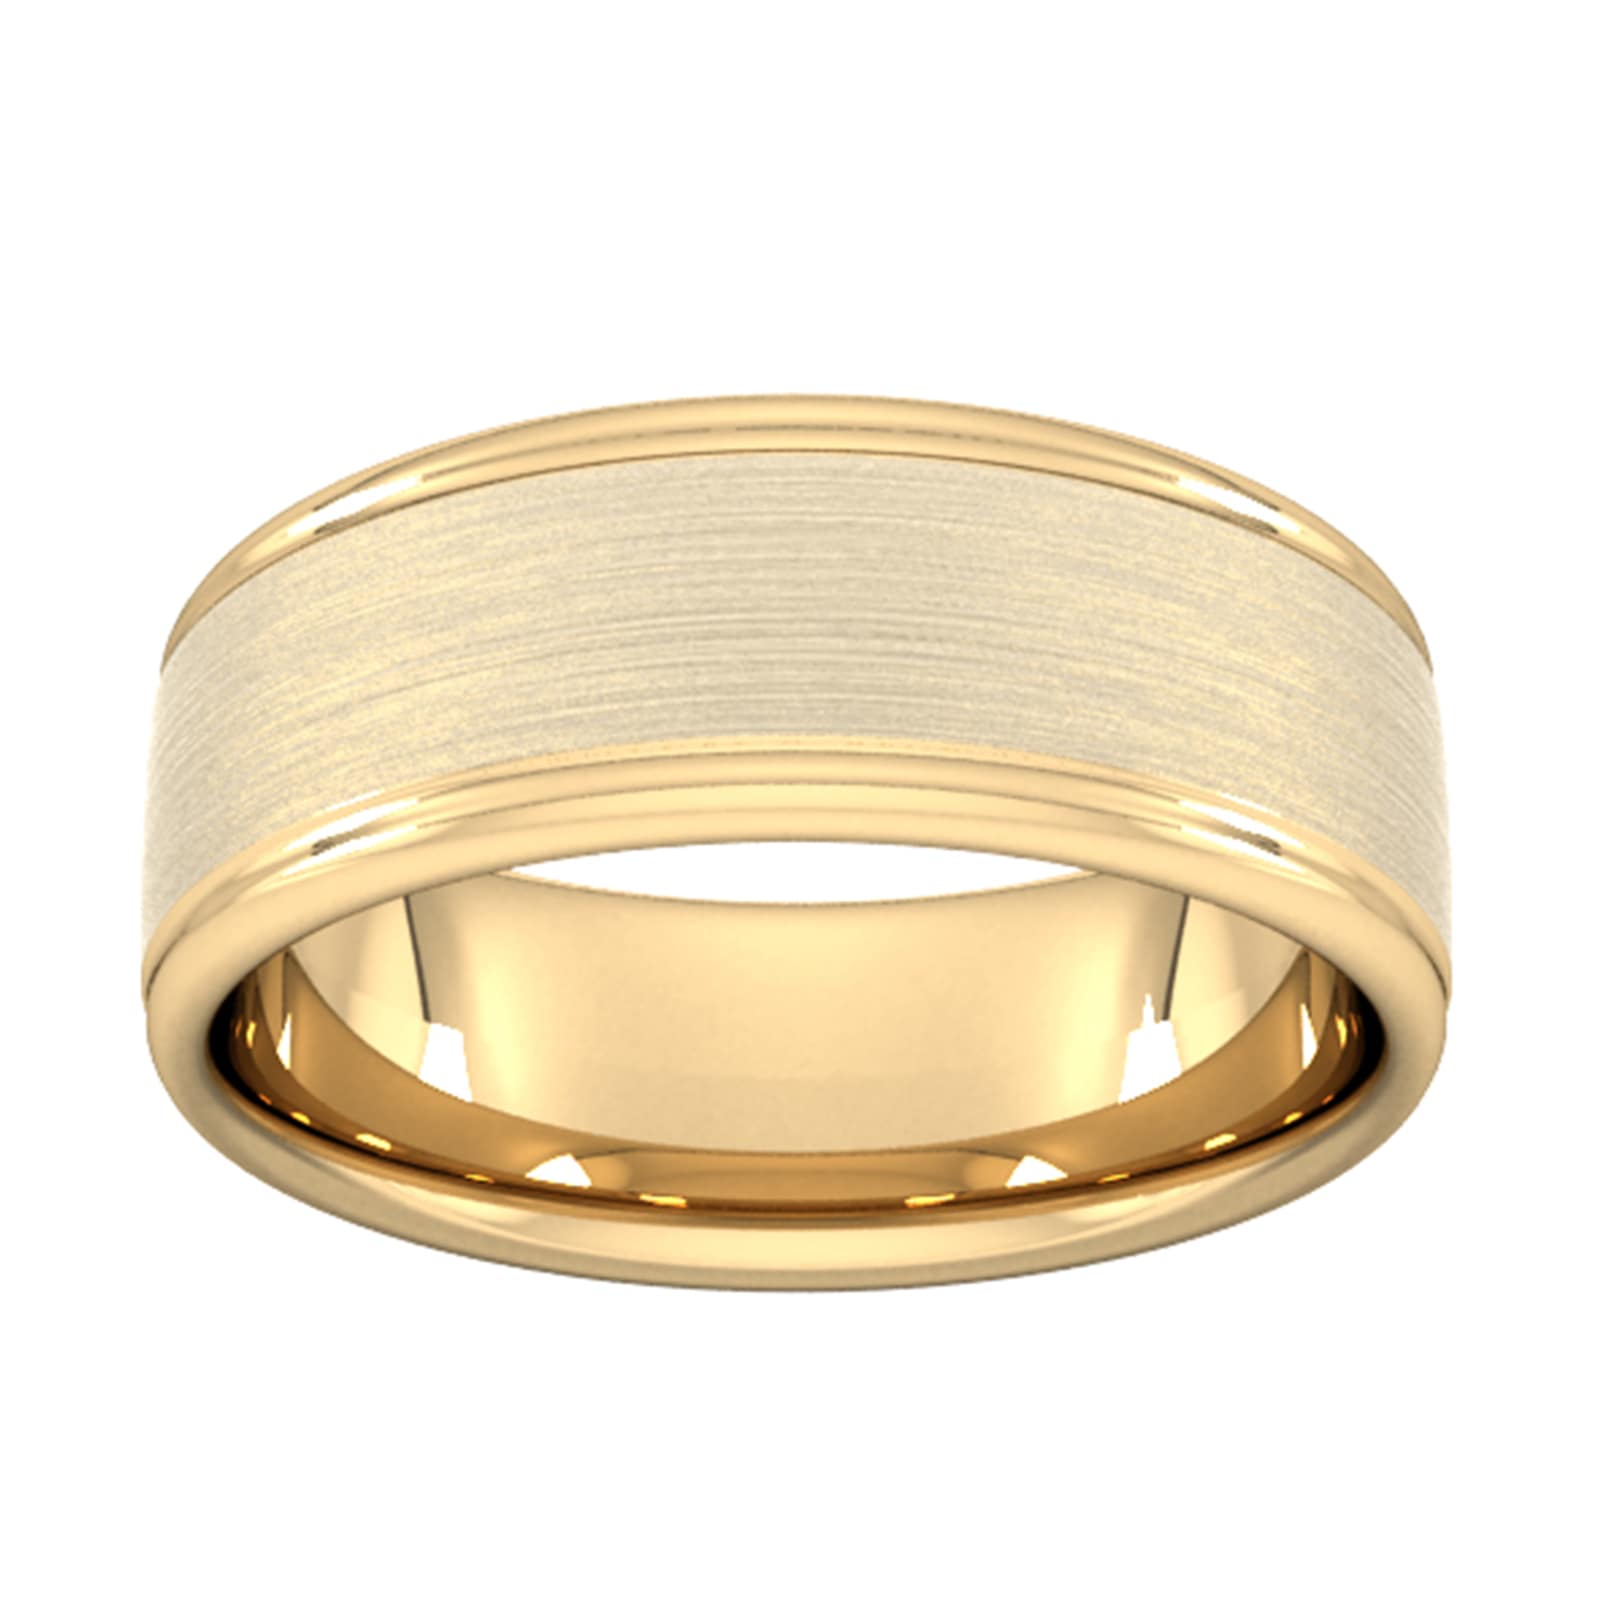 8mm Traditional Court Heavy Matt Centre With Grooves Wedding Ring In 9 Carat Yellow Gold - Ring Size U